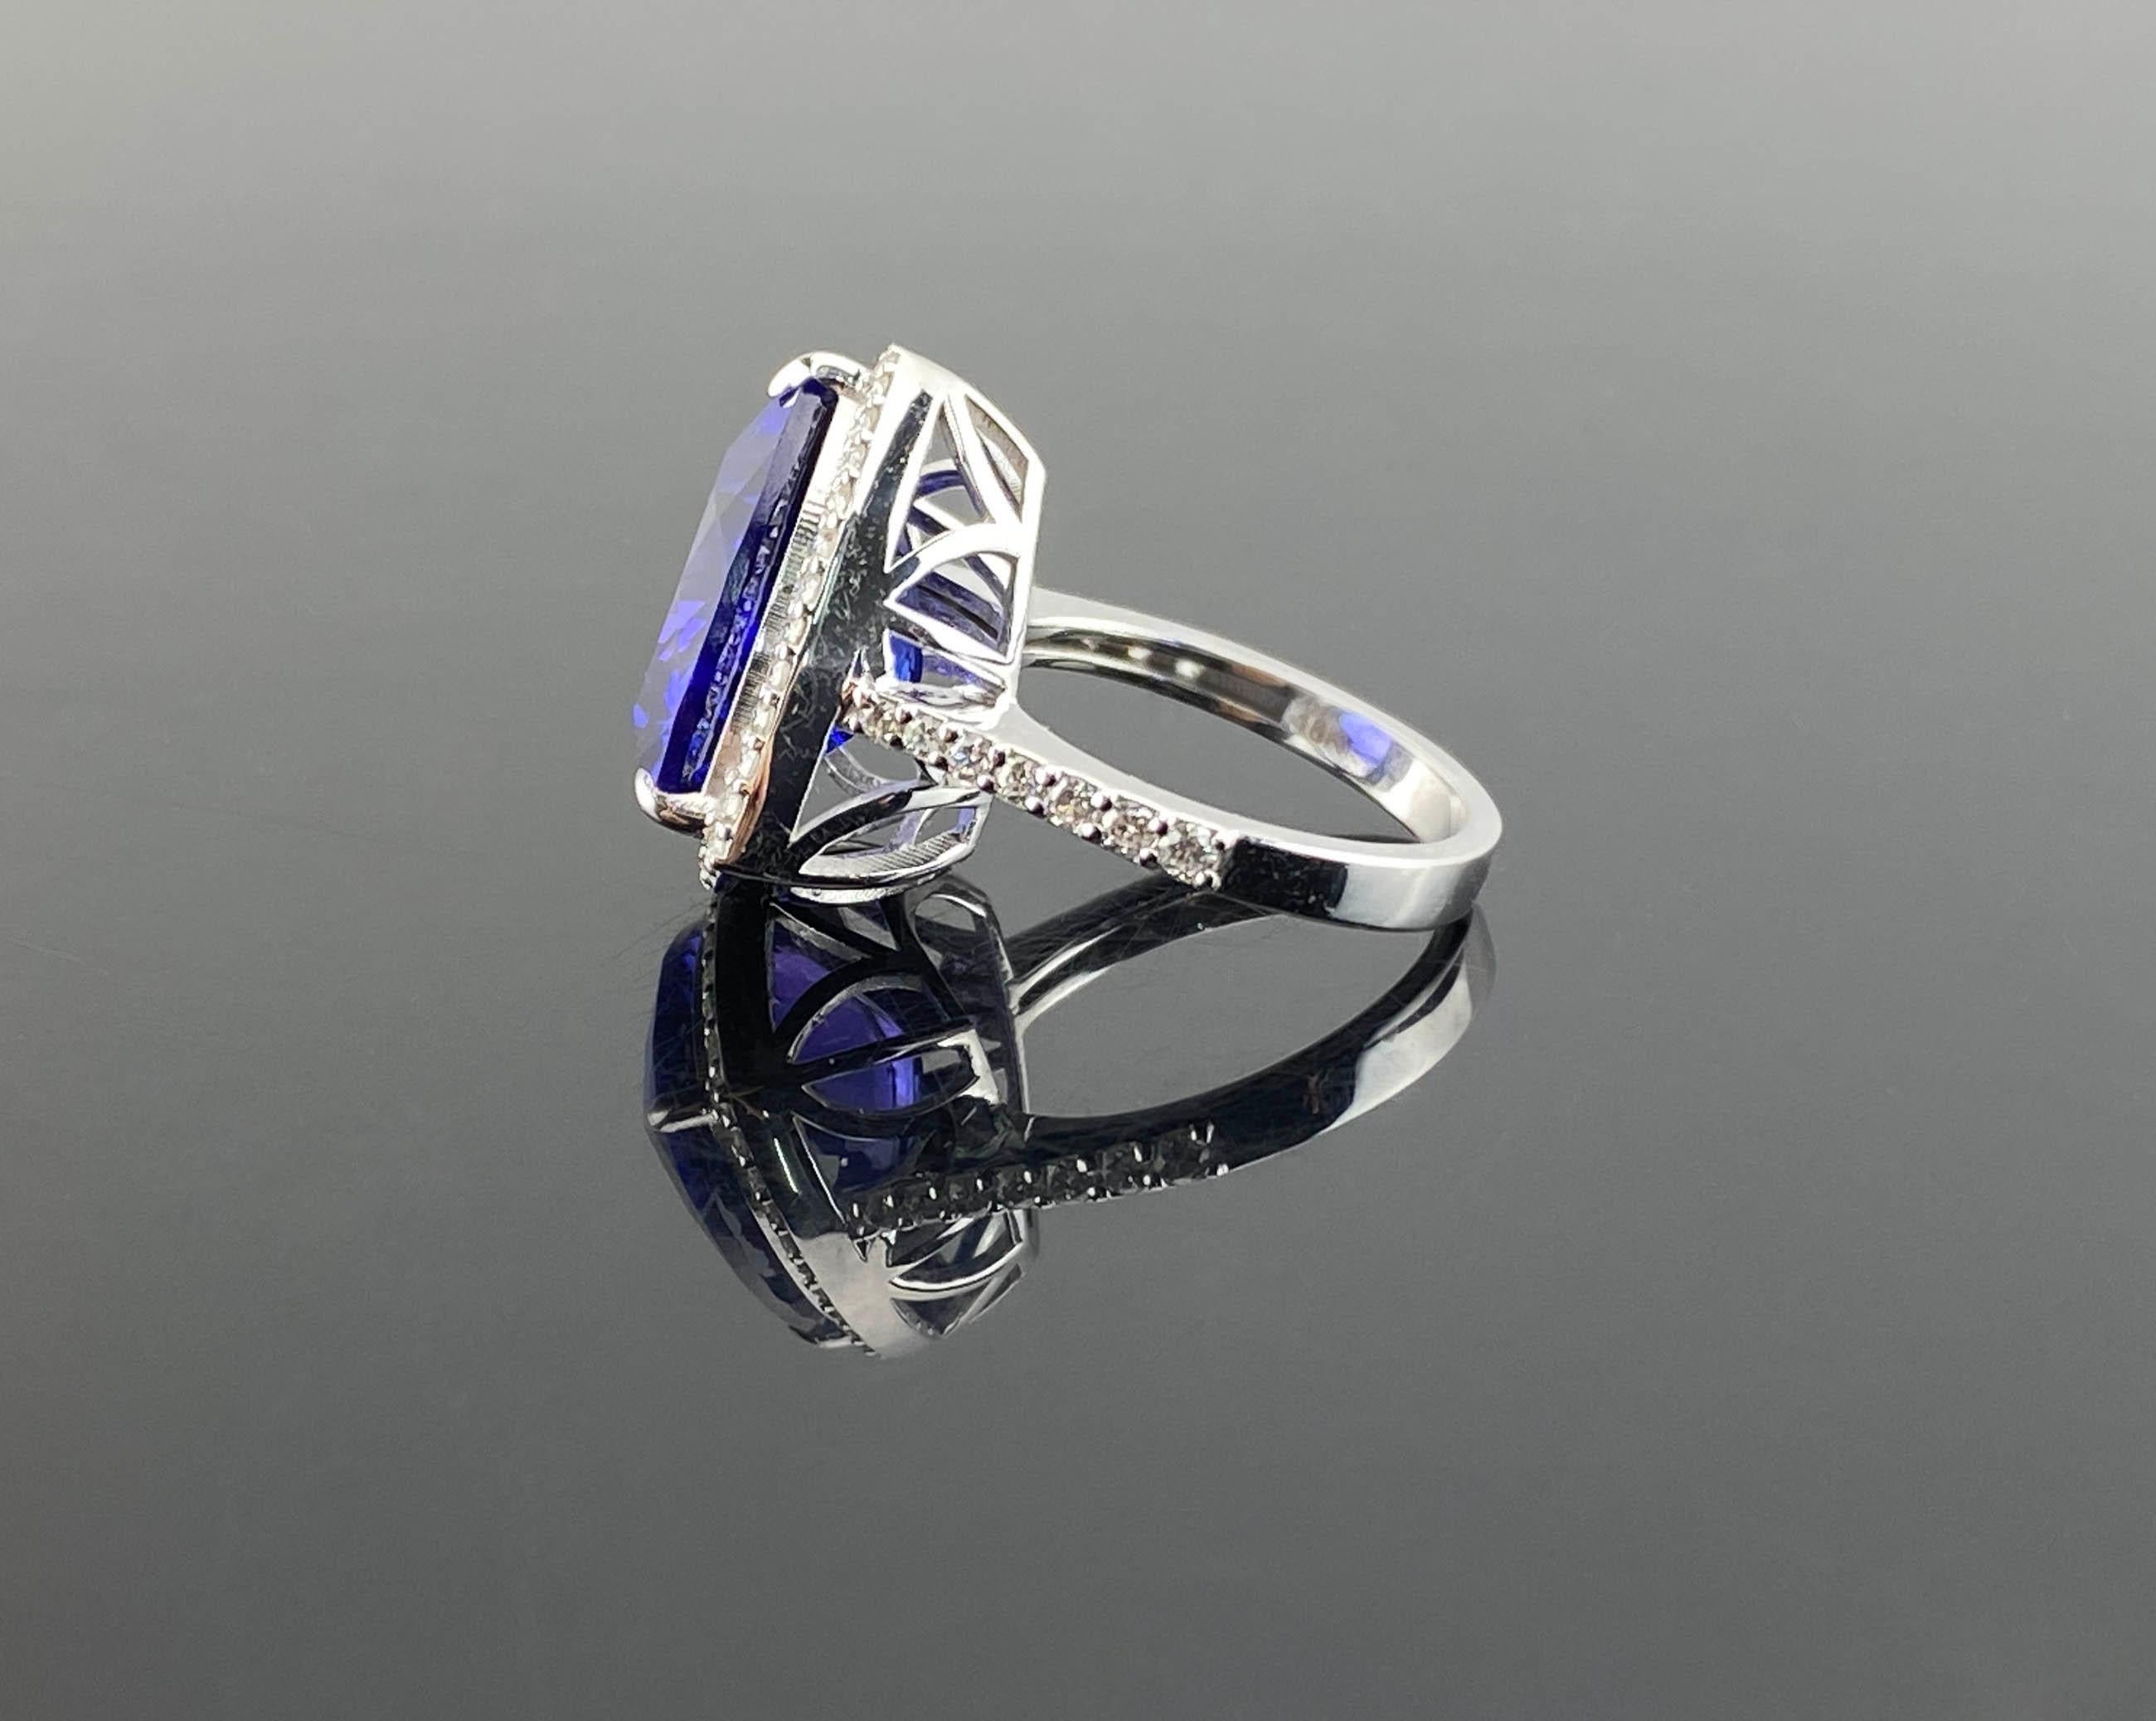 Women's 12.54 Carat Trillion Cut Tanzanite and Diamond Cocktail Ring Set in White Gold For Sale